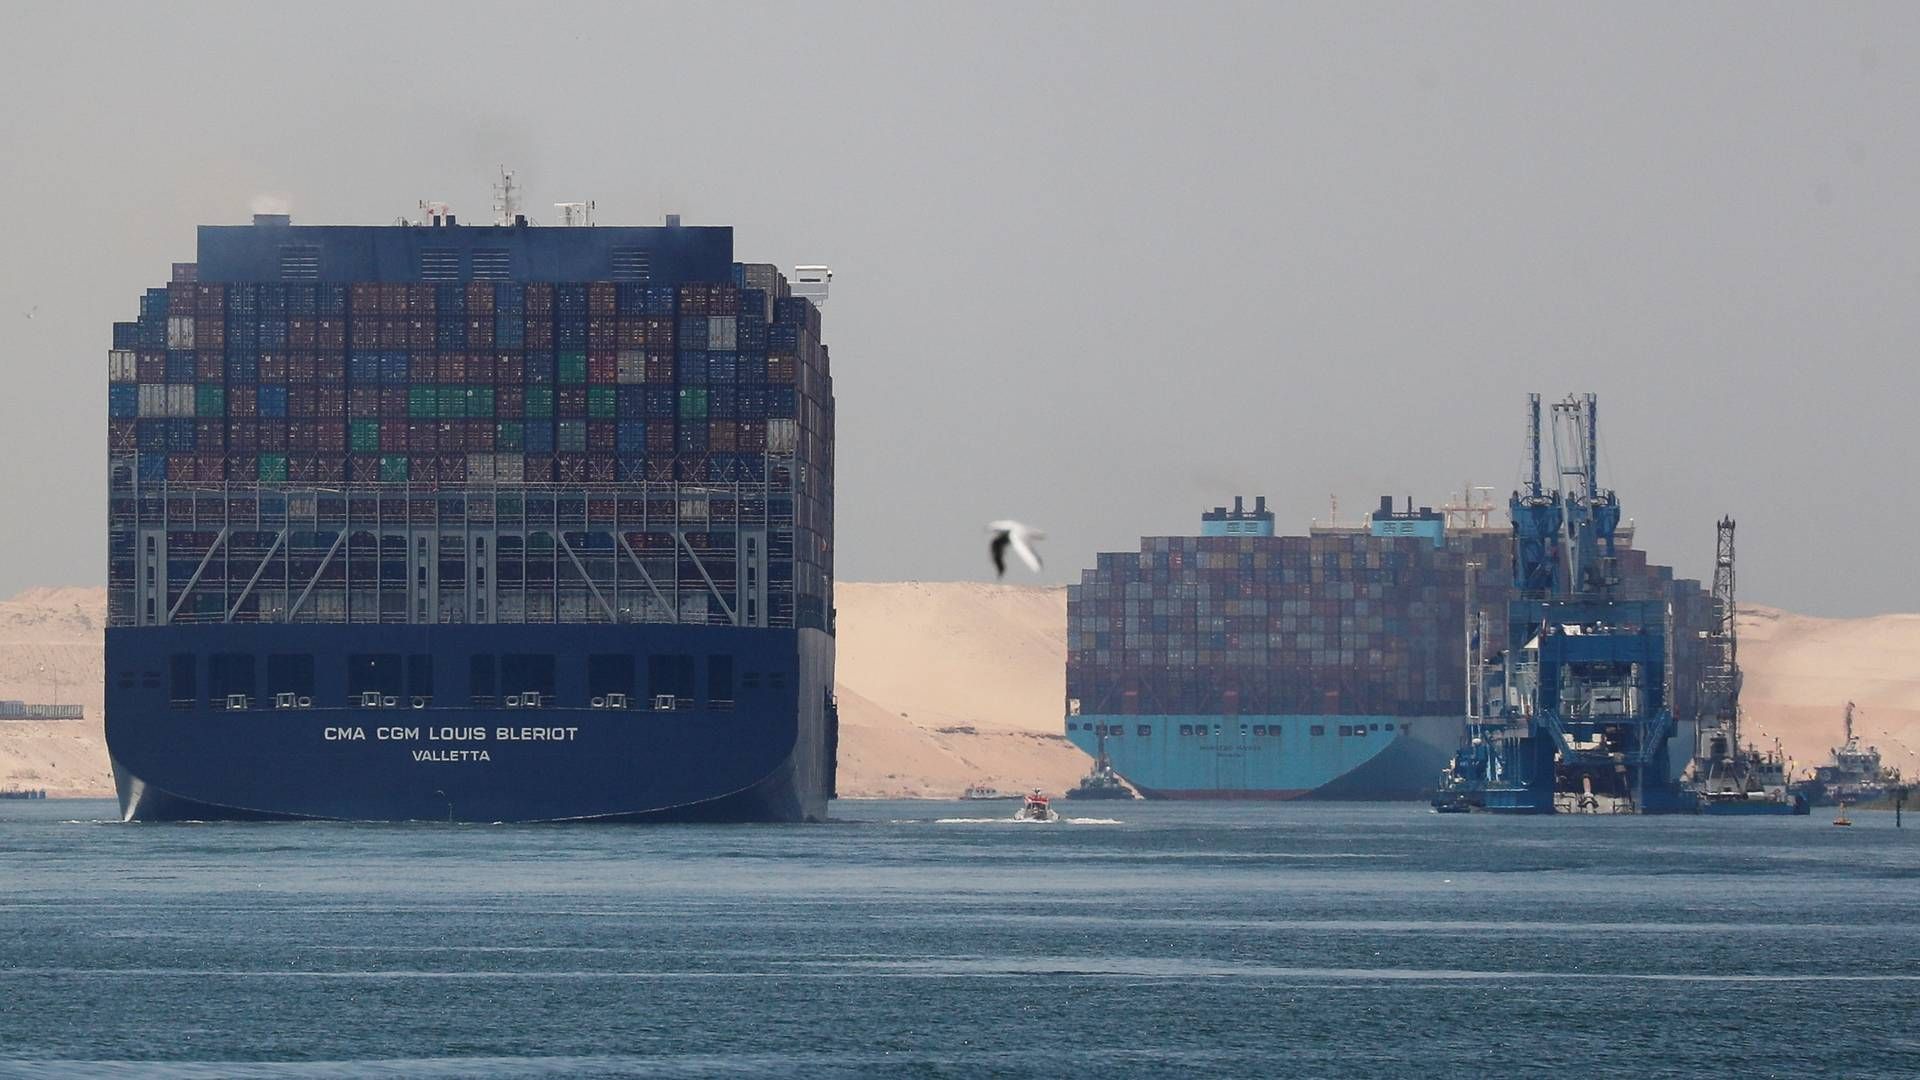 Several major box carriers like Maersk and CMA CGM have commissioned newbuilds able to sail on clean fuel methanol. | Photo: Amr Abdallah Dalsh/Reuters/Ritzau Scanpix